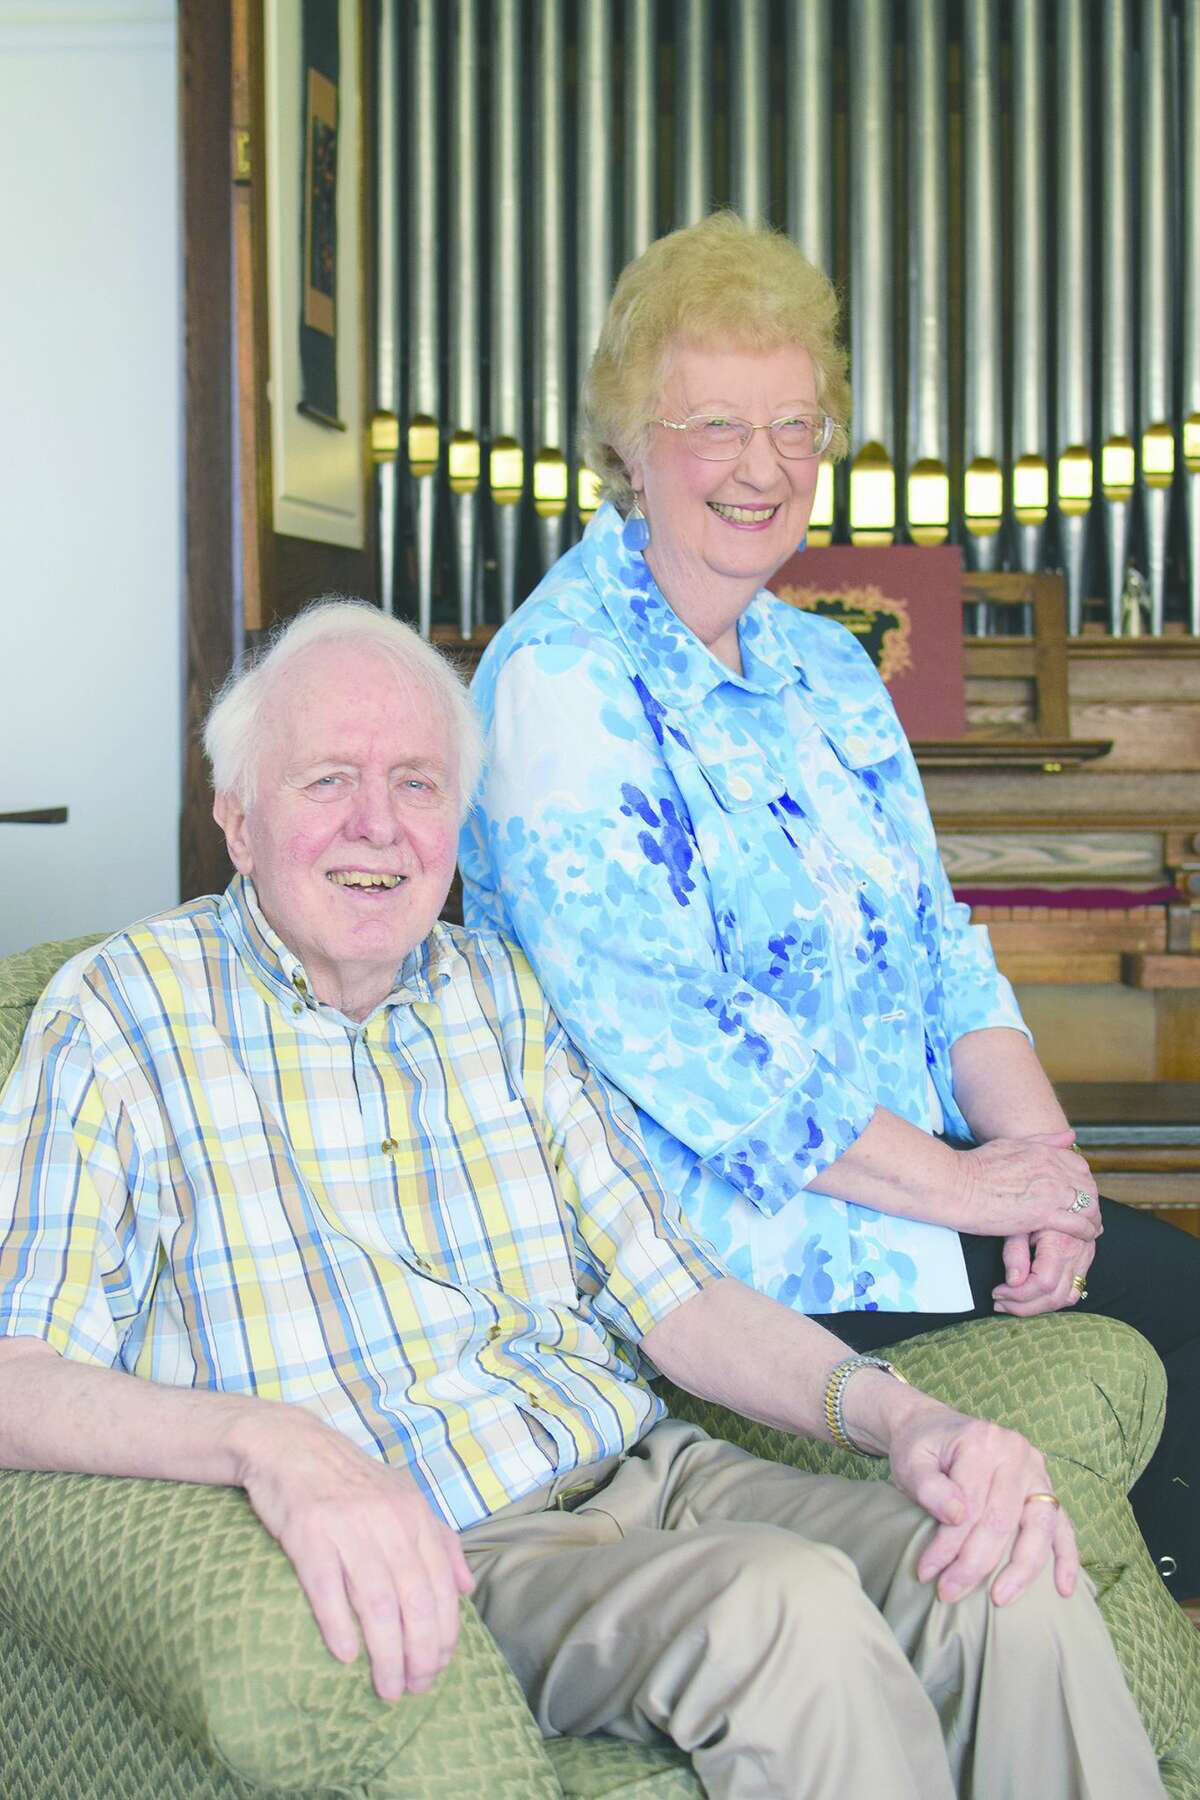 Rudolf and Sharon Zuiderveld are seen in late 2020 in their Jacksonville home. Friday's organ concert by Homer Ferguson III as part of the Illinois College Fine Arts Series will honor Rudolf "Rudy" Zuiderveld, a longtime IC music professor who died in October.